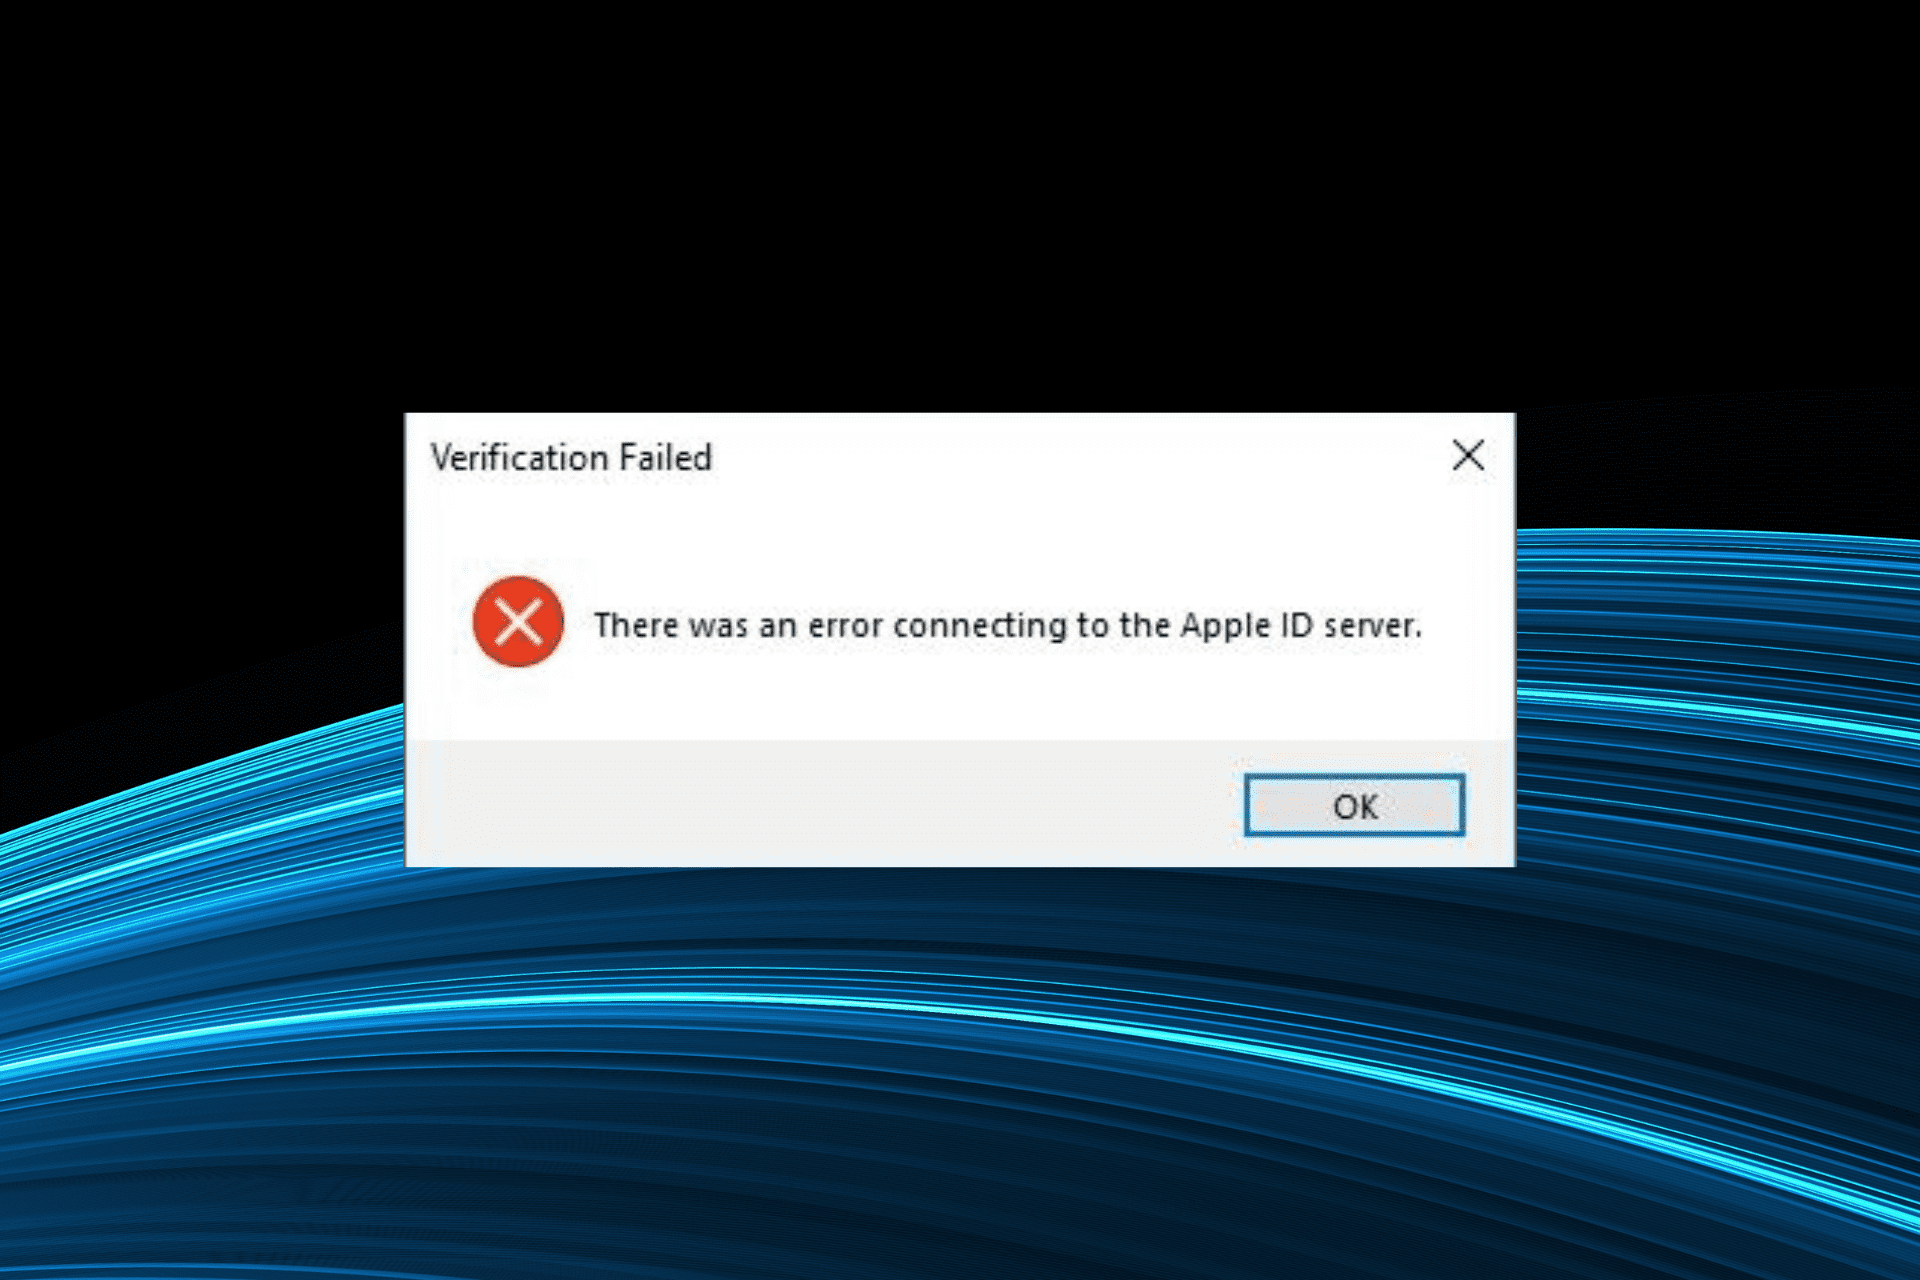 fix there was an error connecting to the apple id server in Windows 10 issue